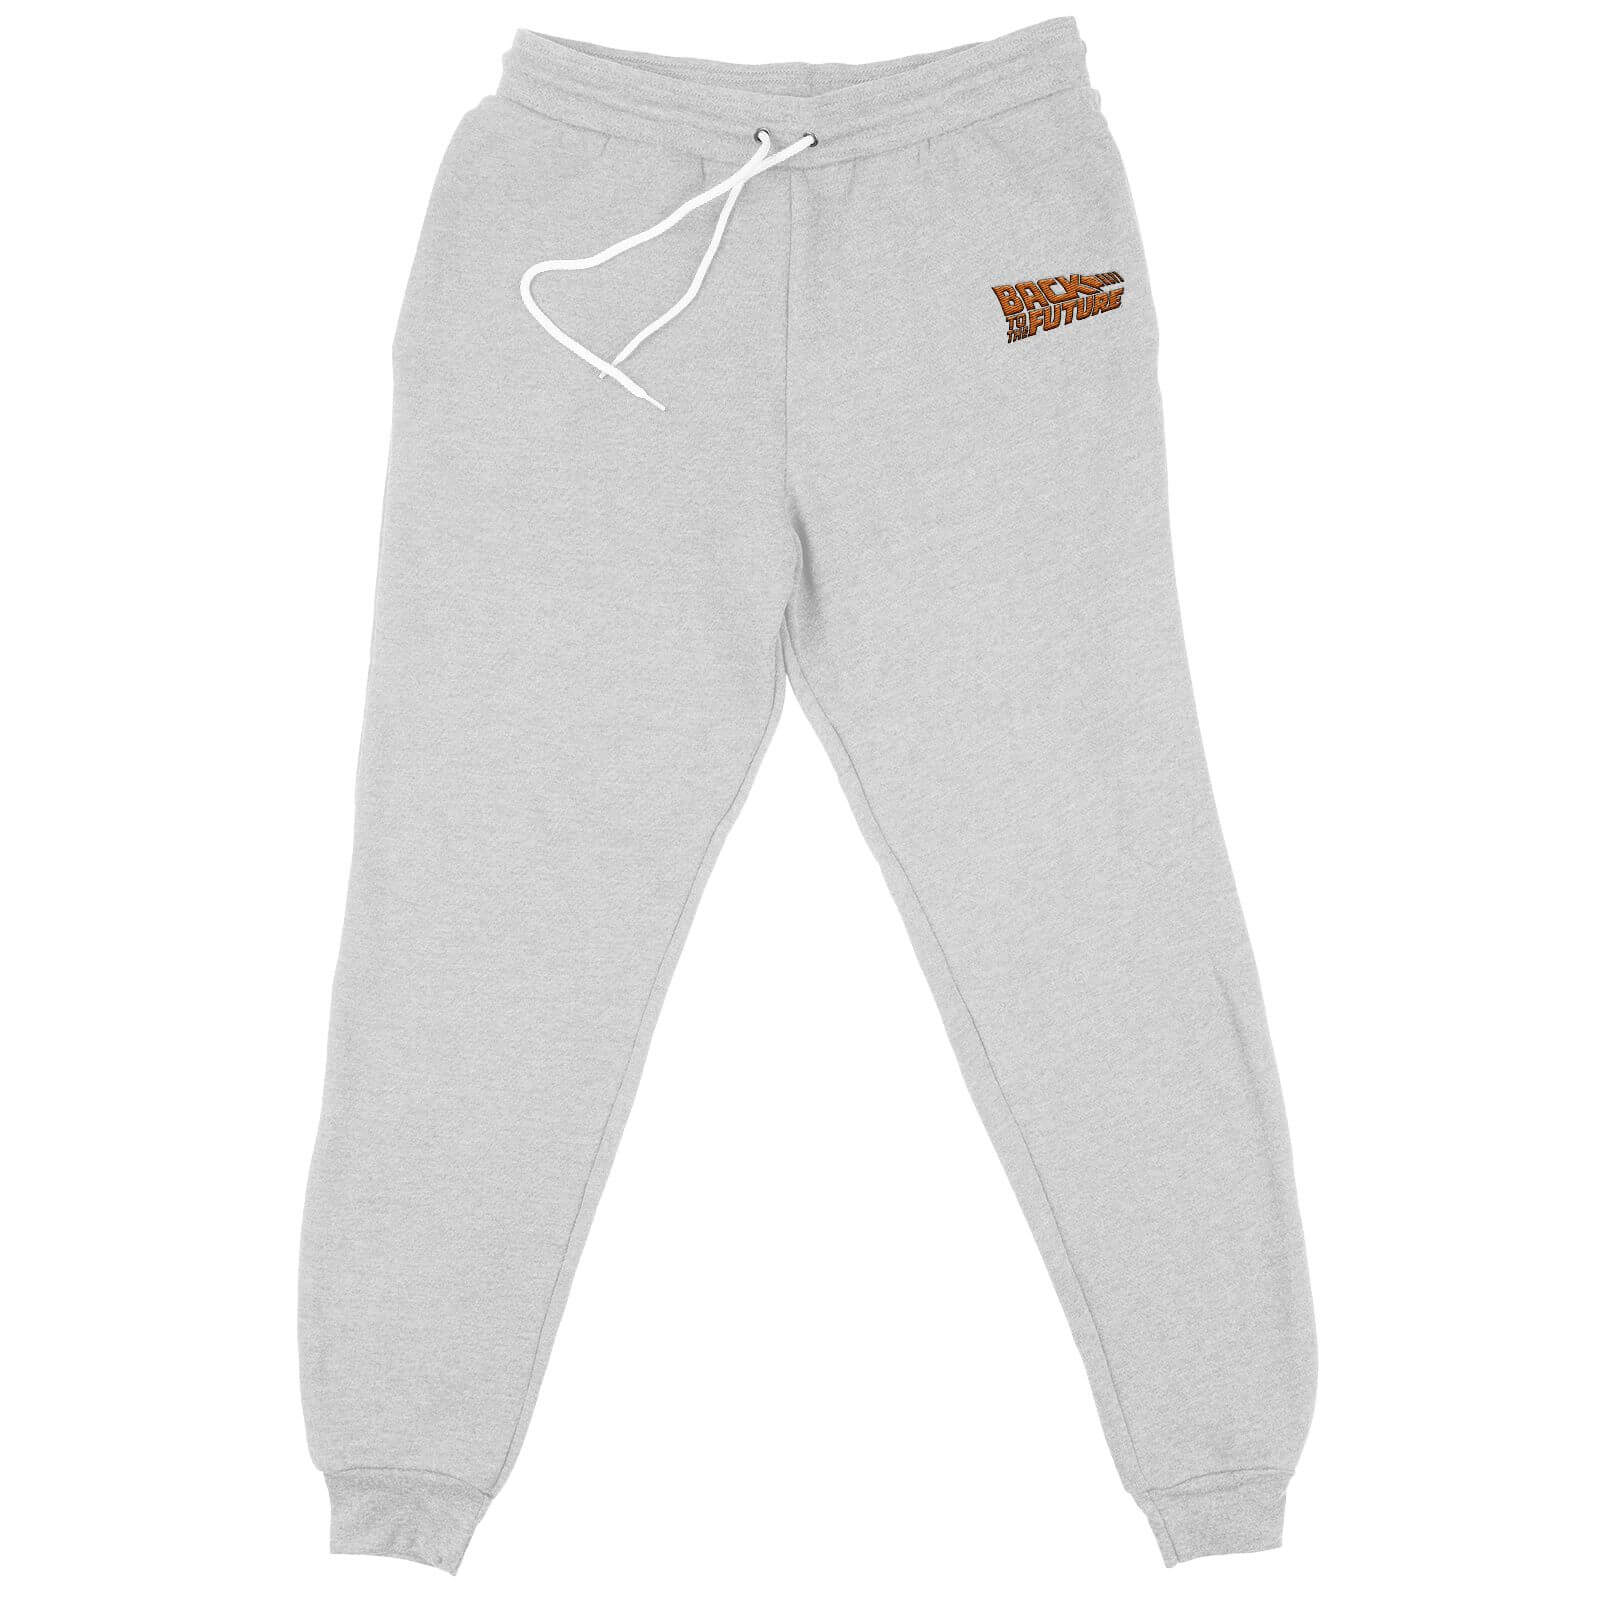 Back To The Future Logo Embroidered Unisex Joggers - Grey - L